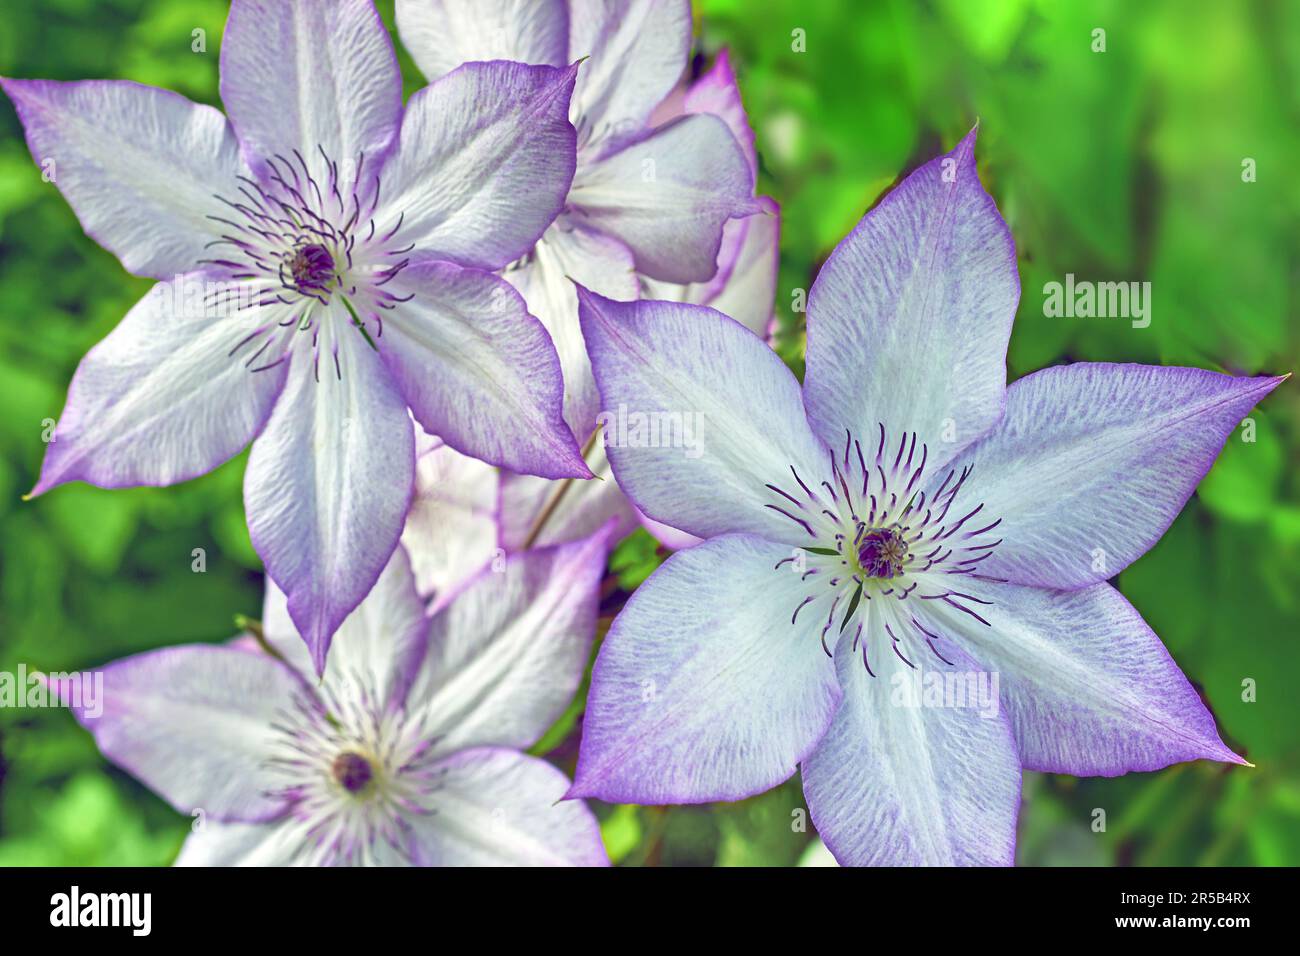 Clematis Blue Ange flowers in sunny green garden or park in summer. Stock Photo